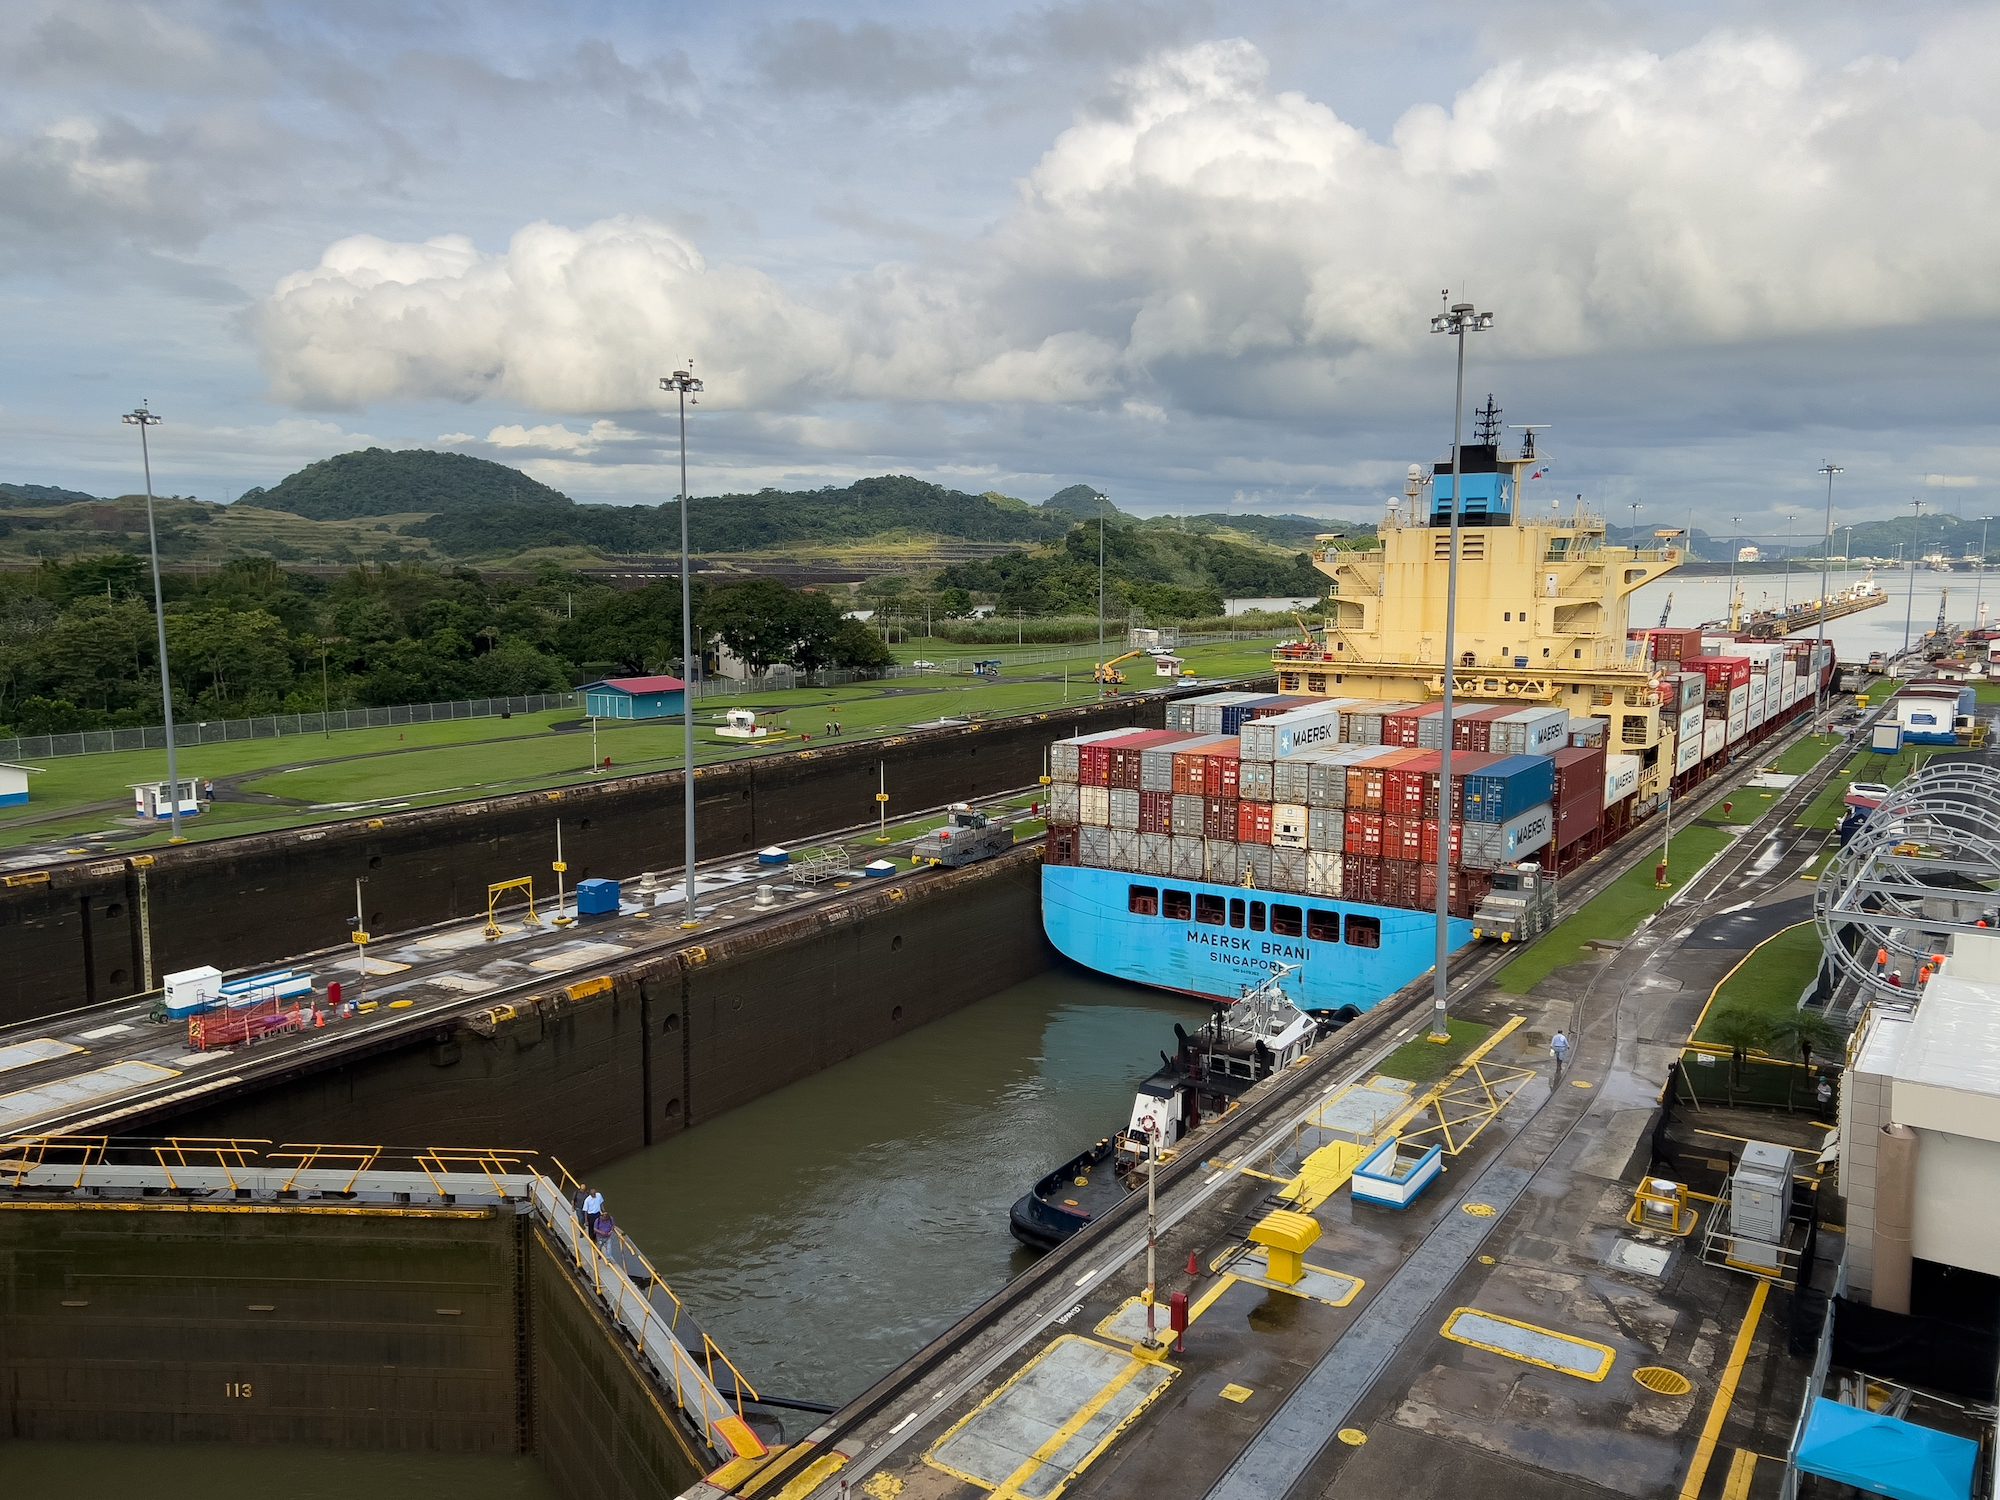 A Maersk ship in the Panama Canal